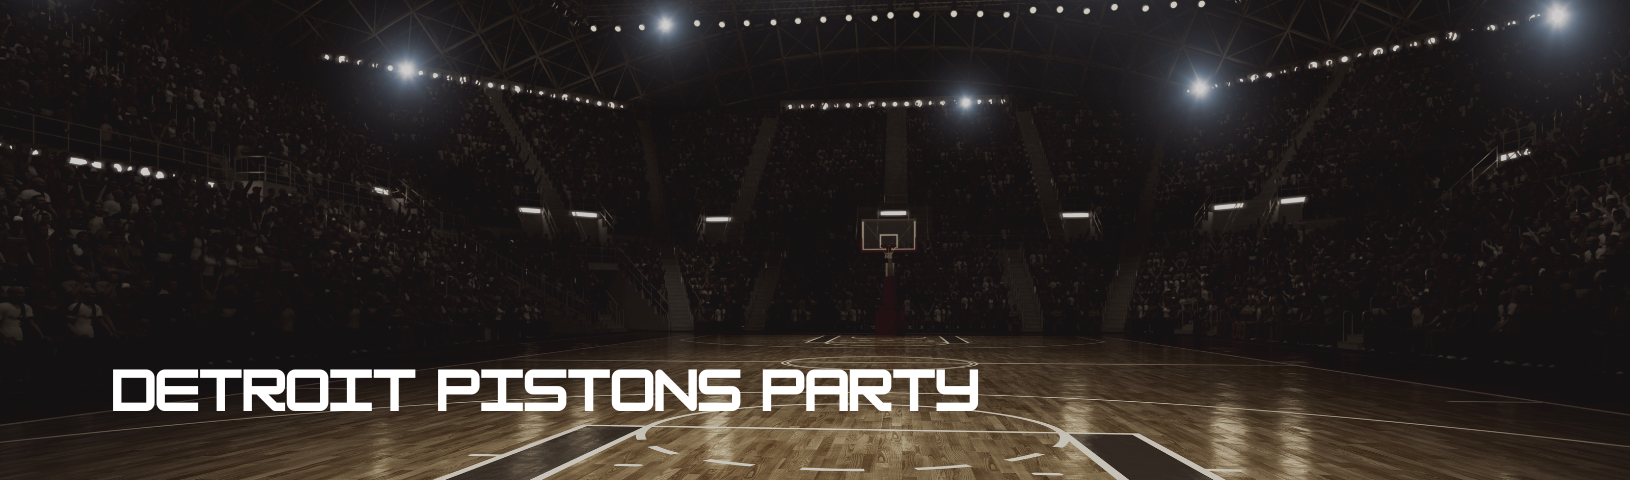 Pistons V Pacers Background Image